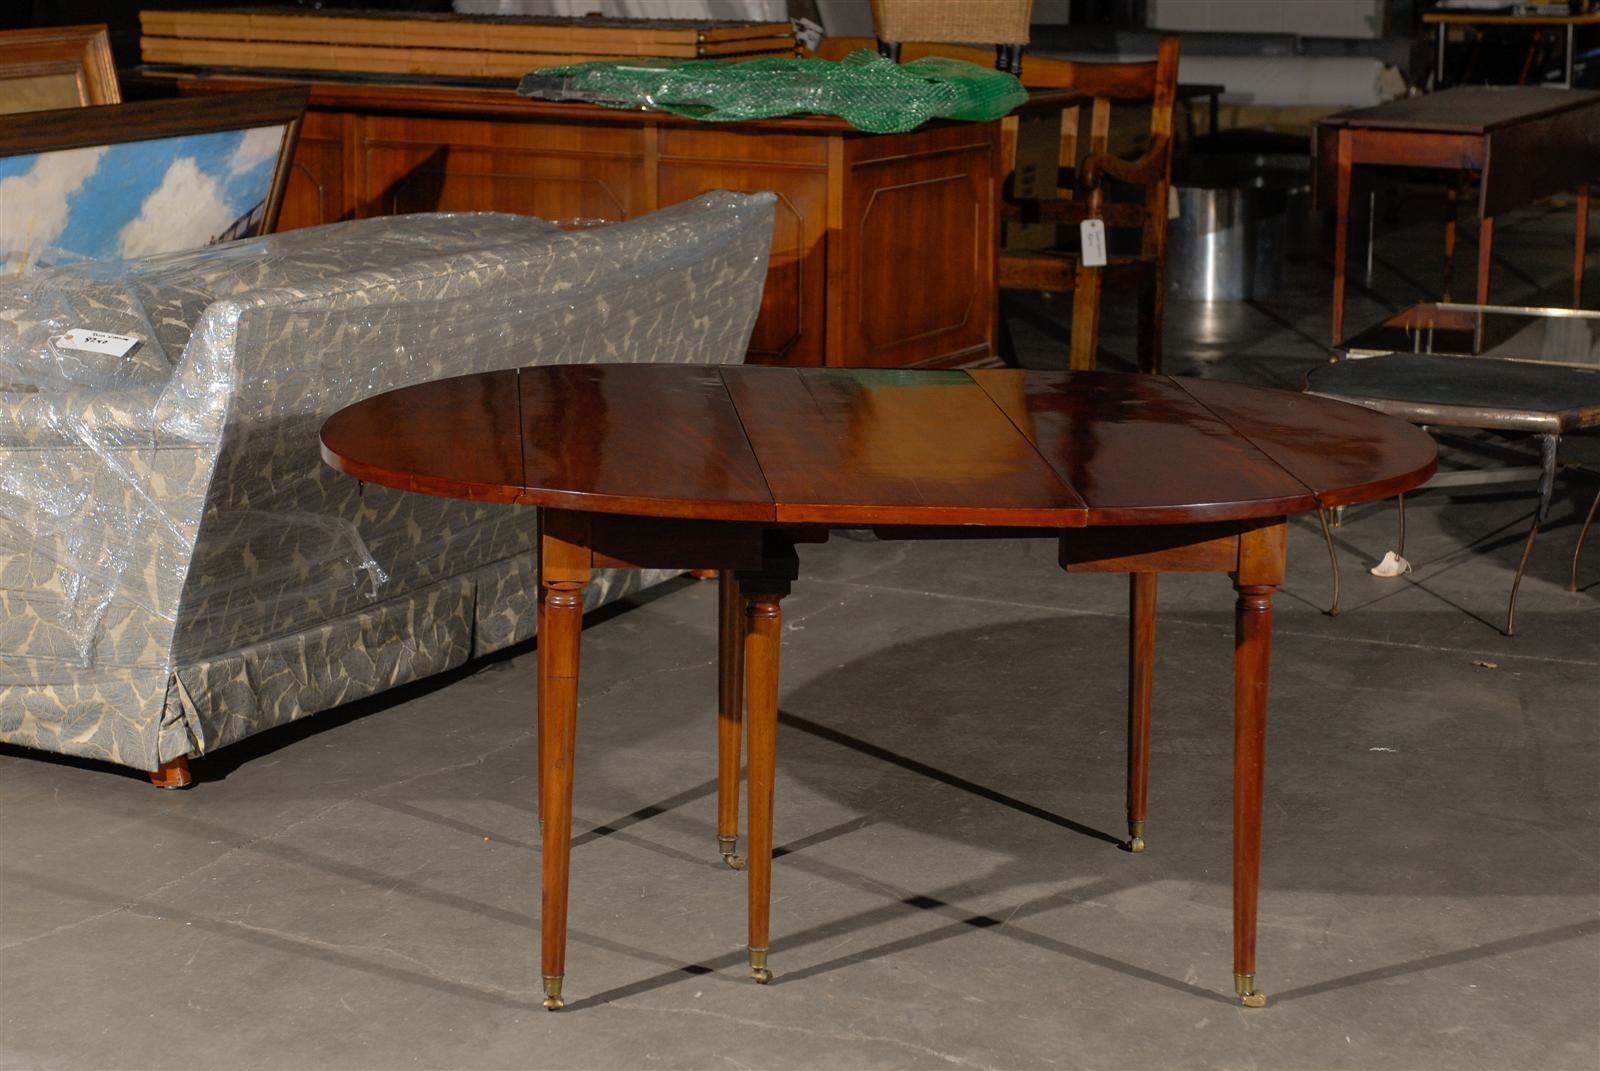 19th century French extension drop leaf dining table, one leaf
Measures: Without leaf: 45.5